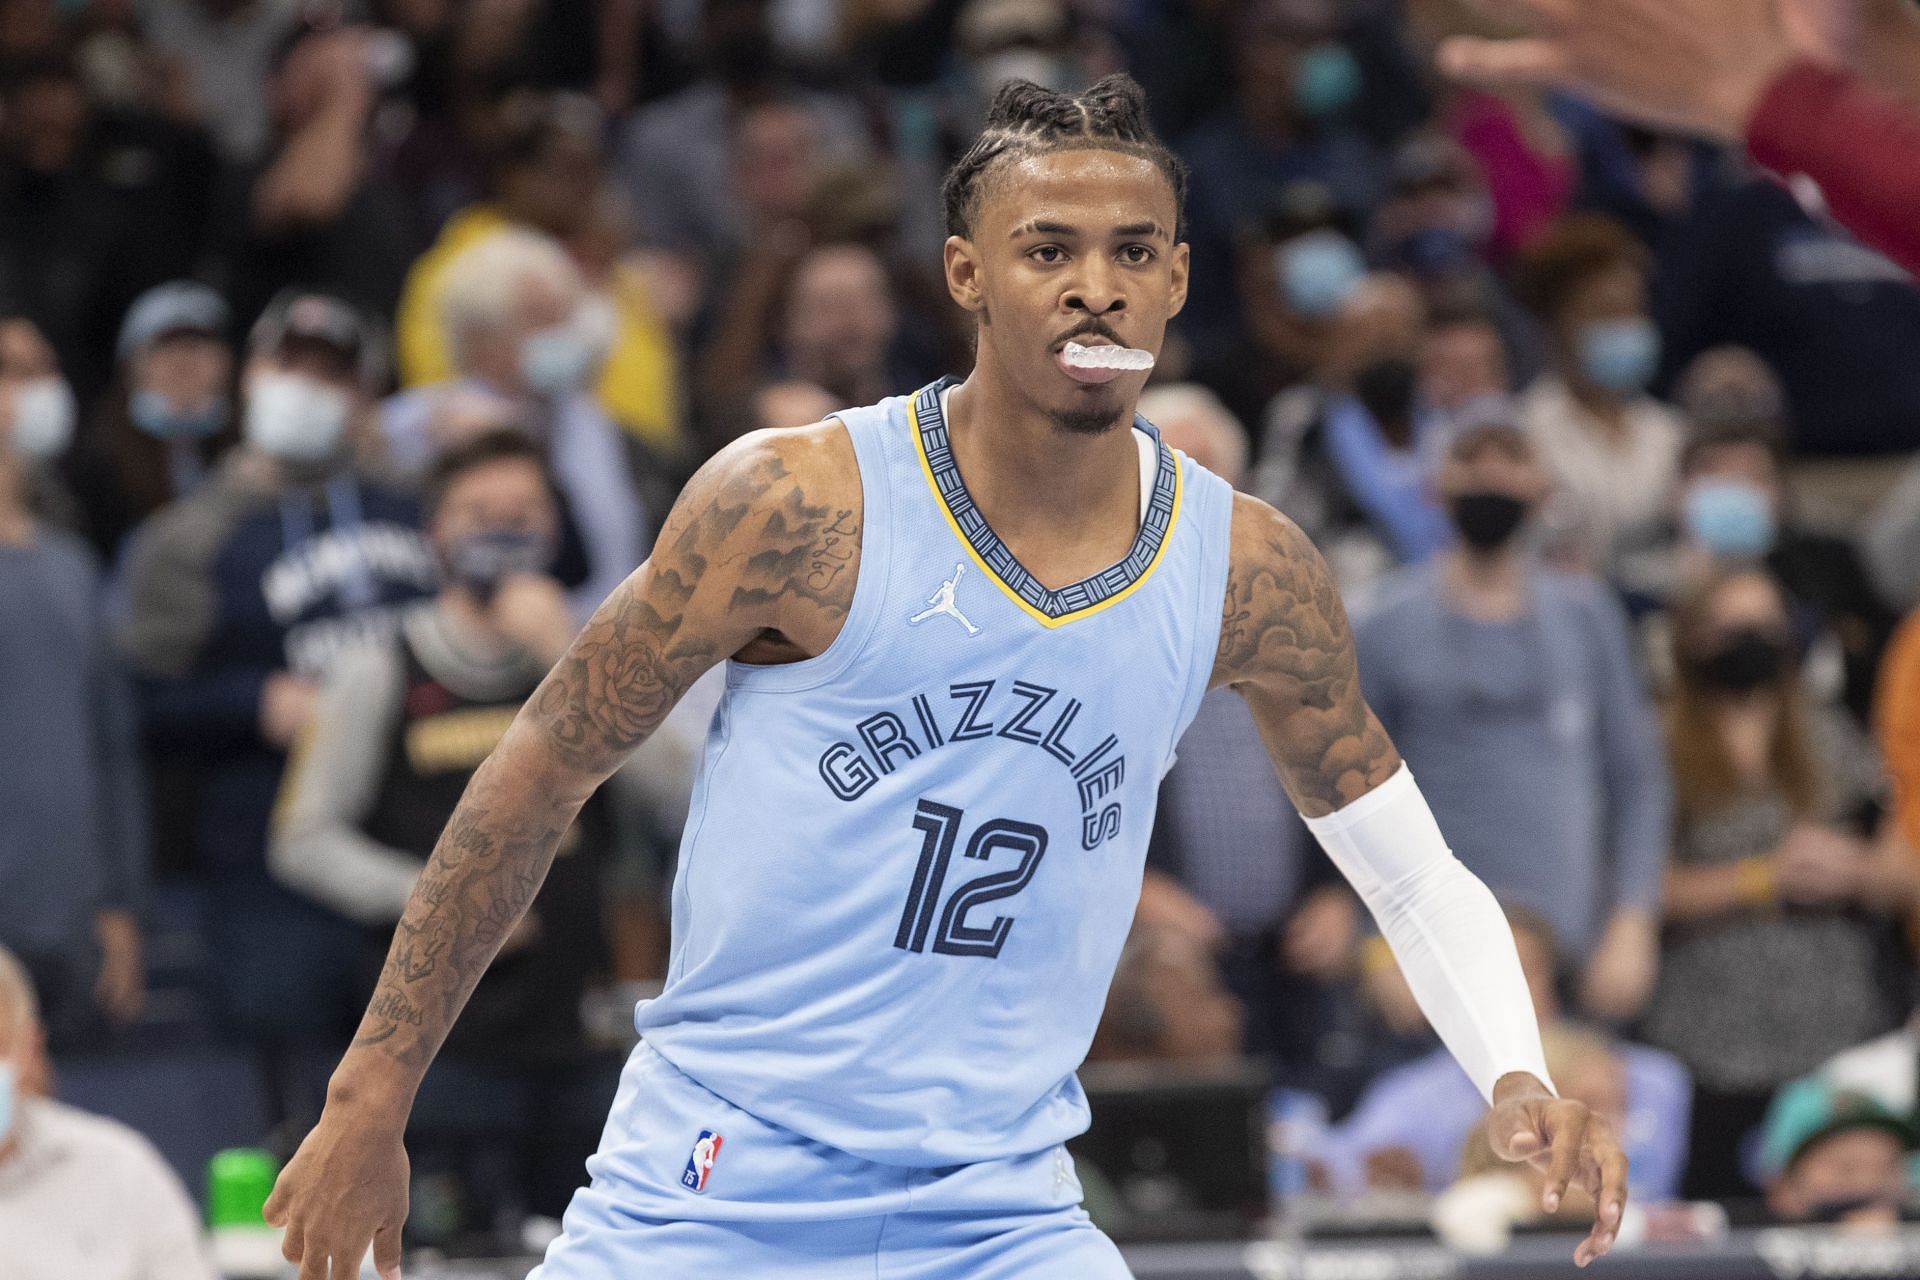 Ja Morant has come out firing for the Memphis Grizzlies and leads the NBA in scoring